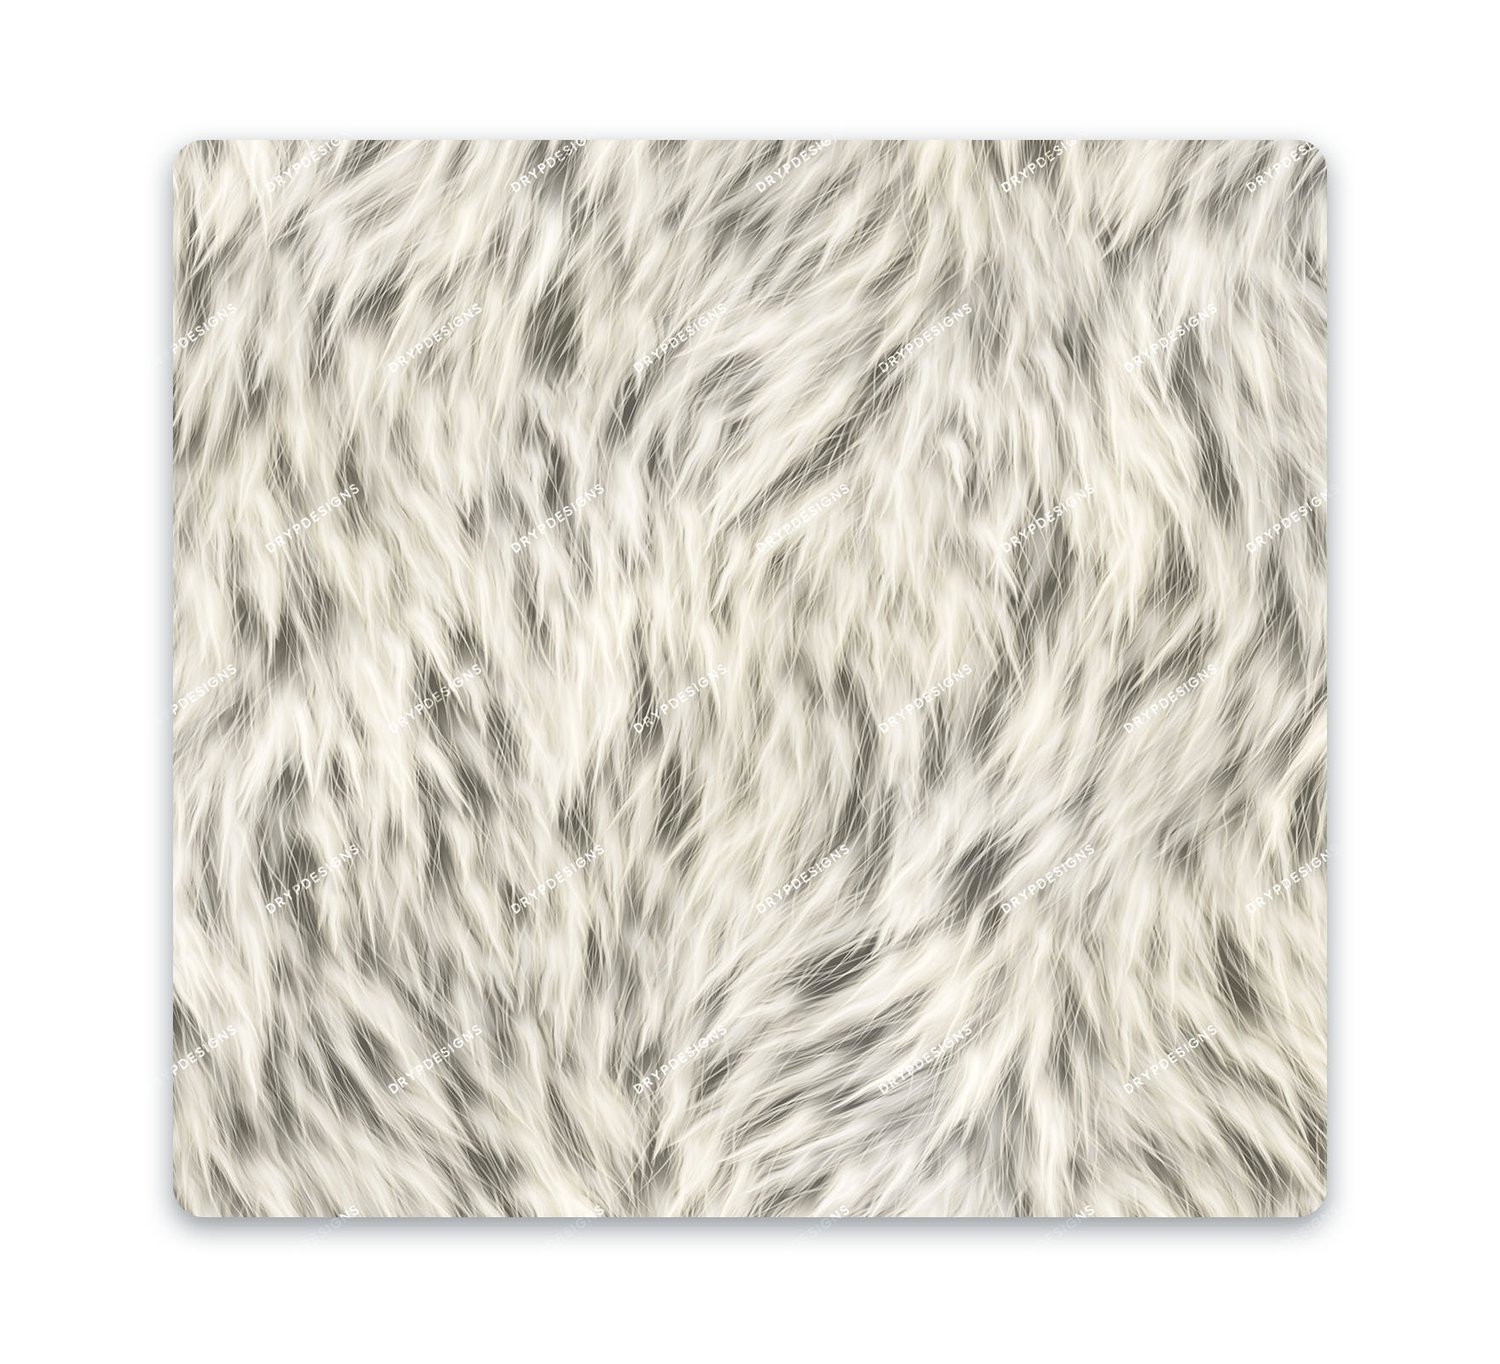 White Faux Fur Seamless Background Texture Pattern Background Or Wallpaper  Image, Myspace & Twitter Backgrounds, Wall…